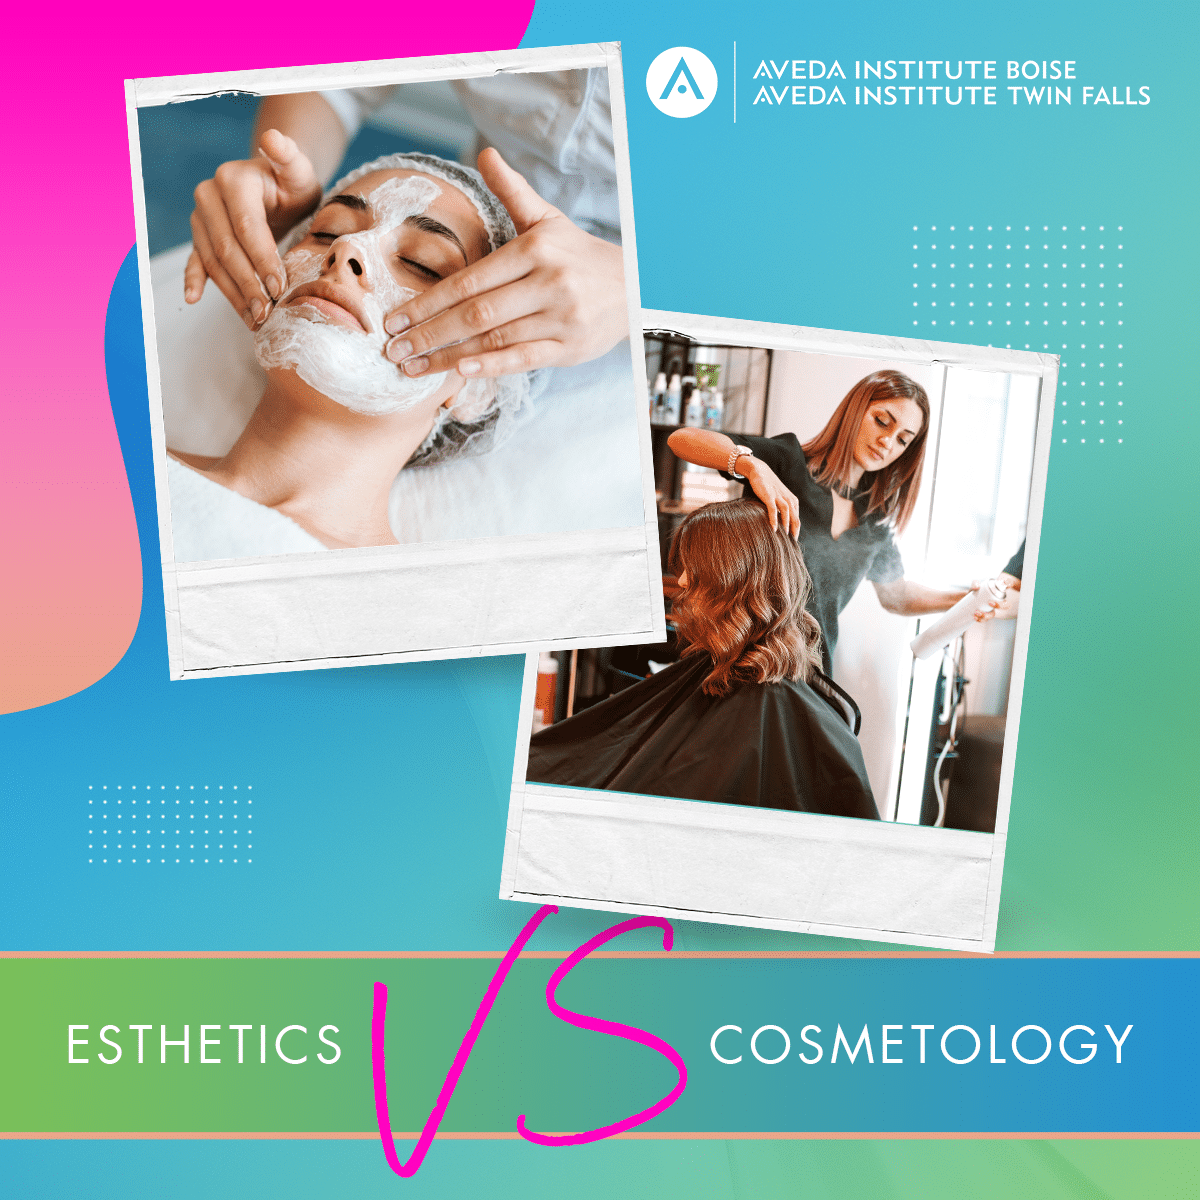 Difference Between Esthetics and Cosmetology